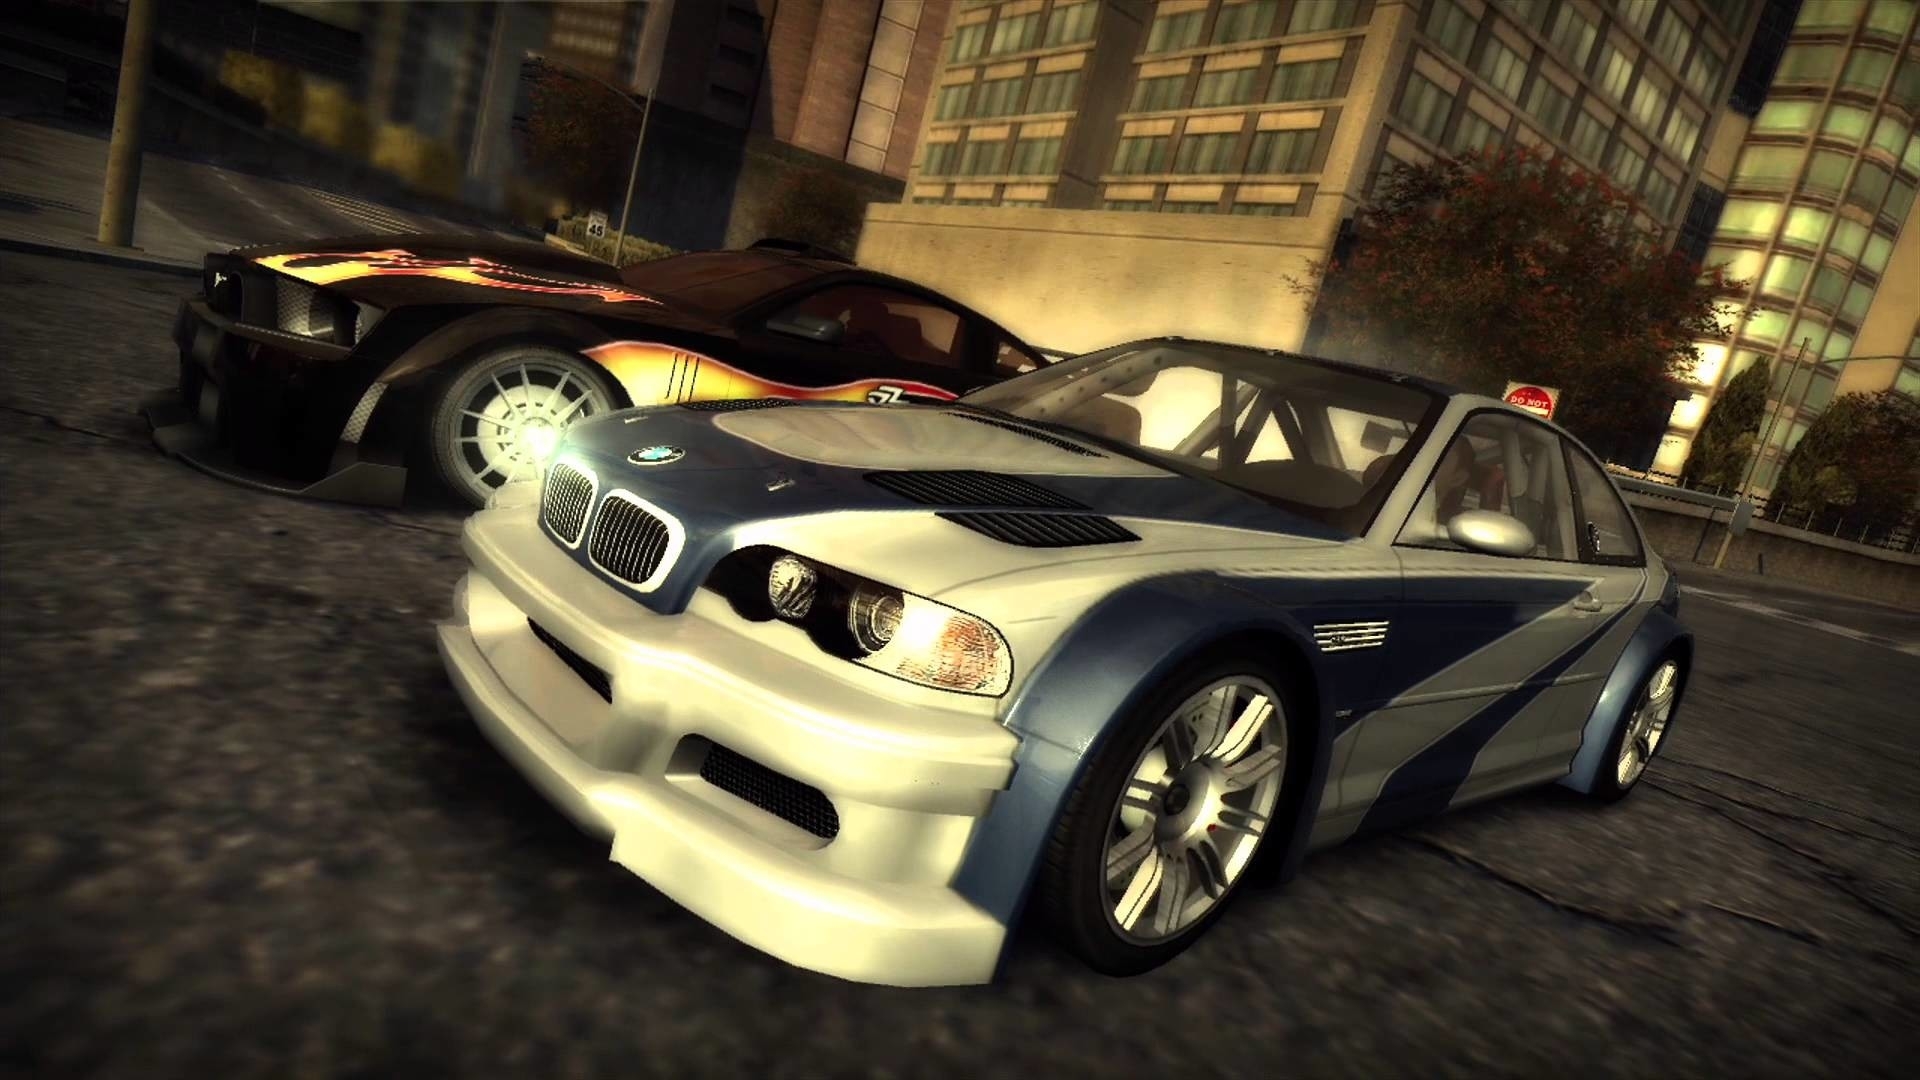 Most wanted hq. NFS MW 2005 Рэйзор. NFS 2005 BMW. Need for Speed mostwanted 2005. NFS most wanted 2005 русская версия.